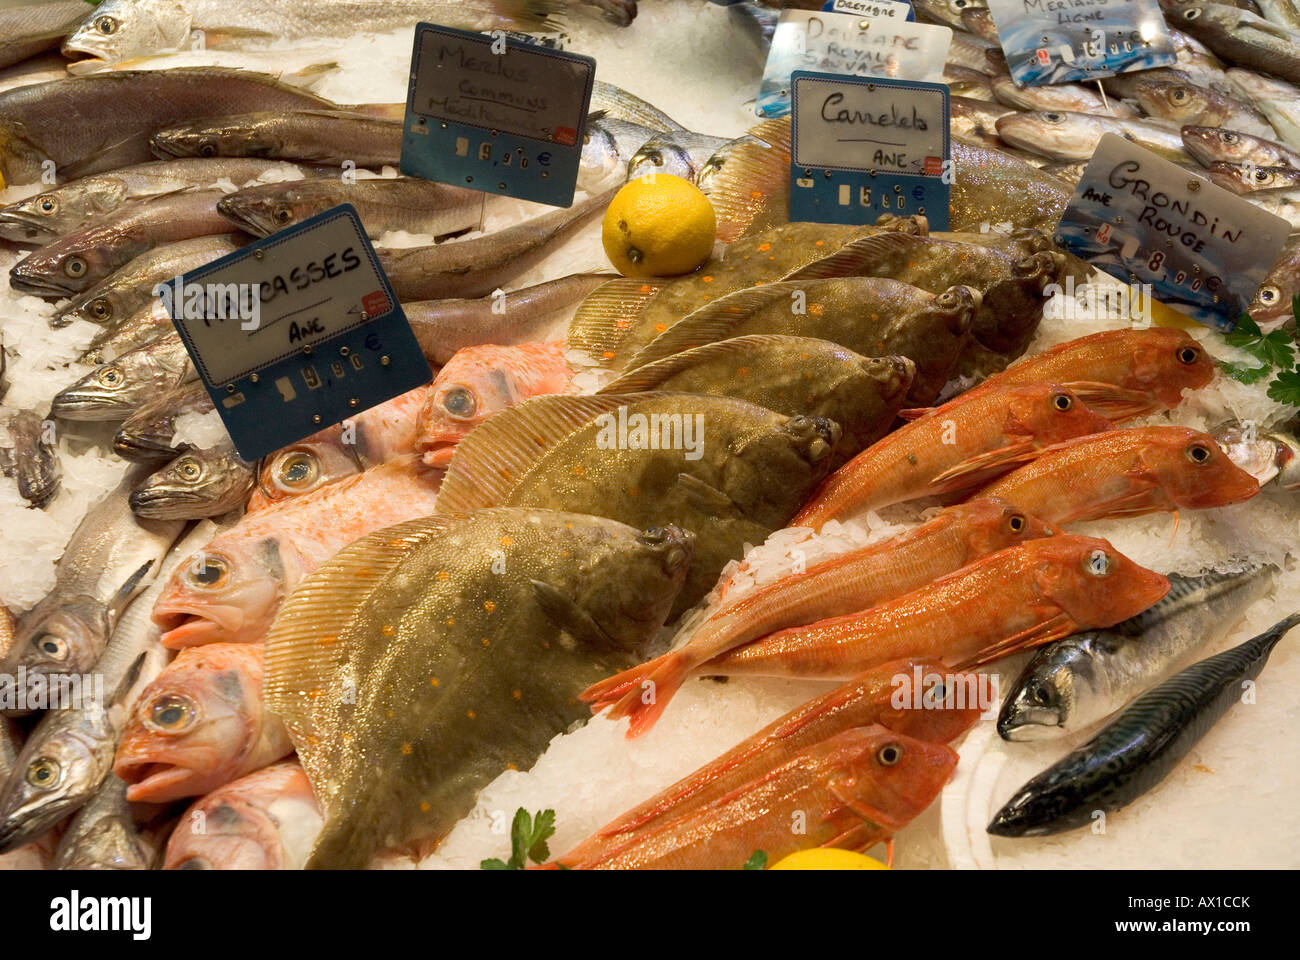 Market hall, fish stand, old part of town, Toulouse, Midi-Pyrenees, Haut-Garonne, France Stock Photo